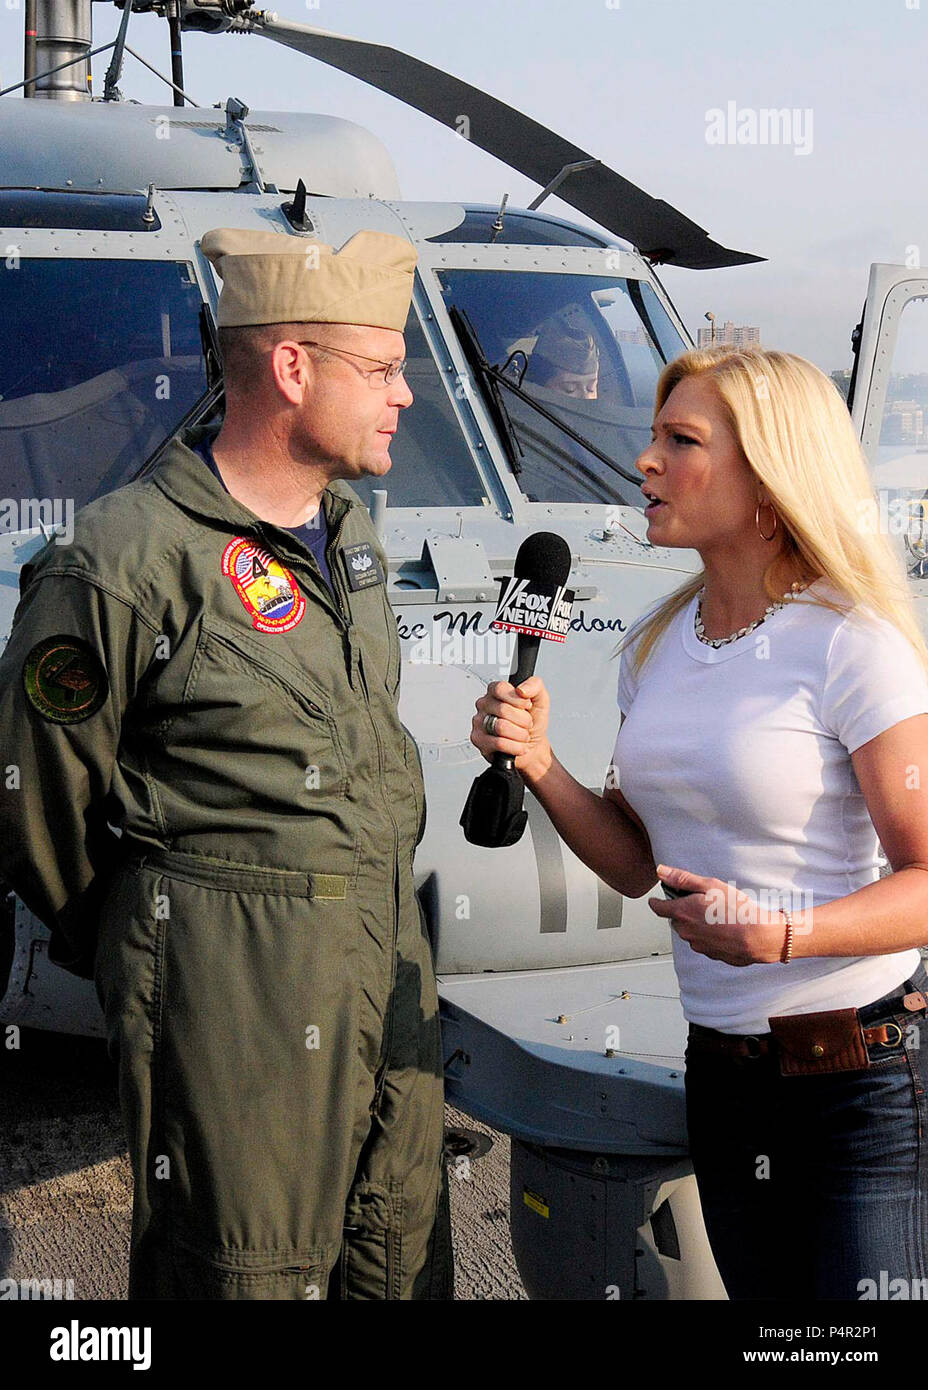 NEW YORK (may 26, 2012) -- Senior Chief Operations Specialist (SW/AW) Andy Sutter from Assault Craft Unit 4 talks with Fox and Friends News Reporter Anna Kooiman in a live interview on the flight deck of the amphibious assault ship USS Wasp (LHD 1) during Fleet Week New York.This marks the 25th year the city has celebrated the nation's sea services for the citizens of New York and the tri-state area. This year, the seven-day event, coincides with the commemoration of the Bicentennial of the War of 1812, with more than 6,000 service members from the Navy, Marine Corps and Coast Guard sea servic Stock Photo